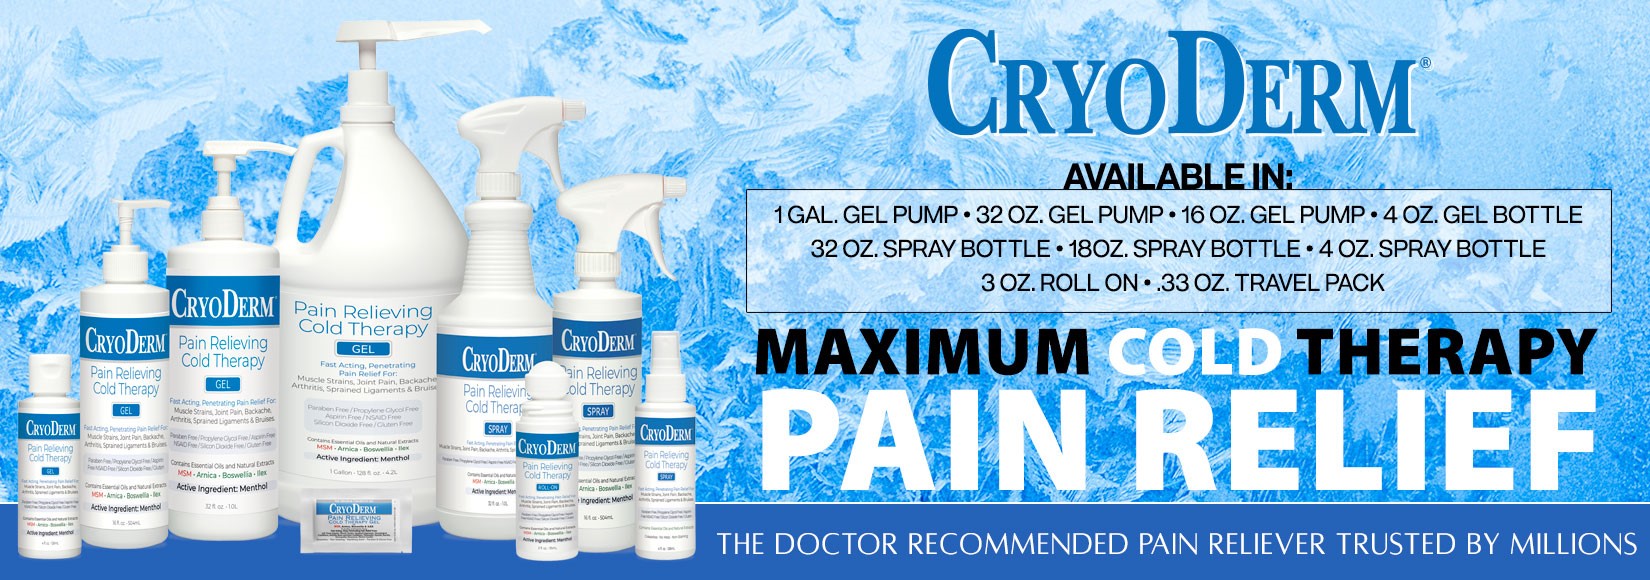 Cryoderm Cold